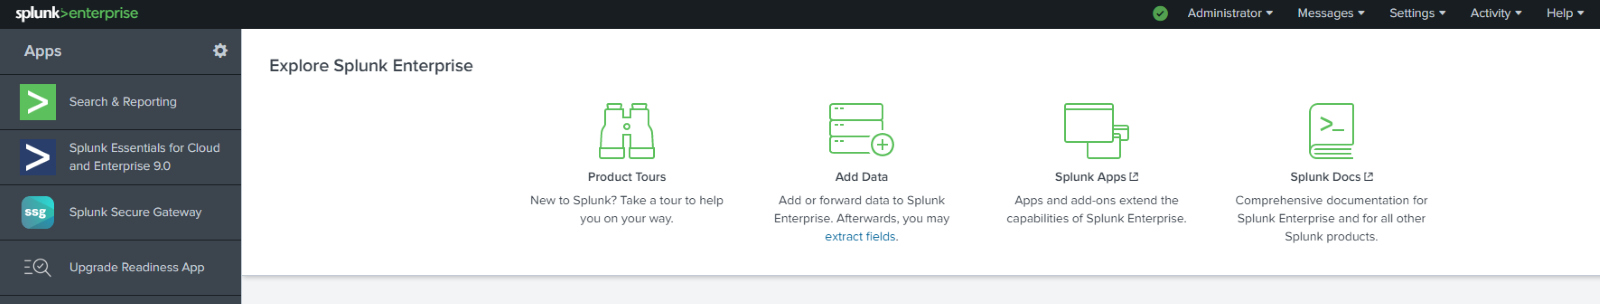 How to Switch to Splunk Free from Splunk Enterprise Step 2: Go to settings